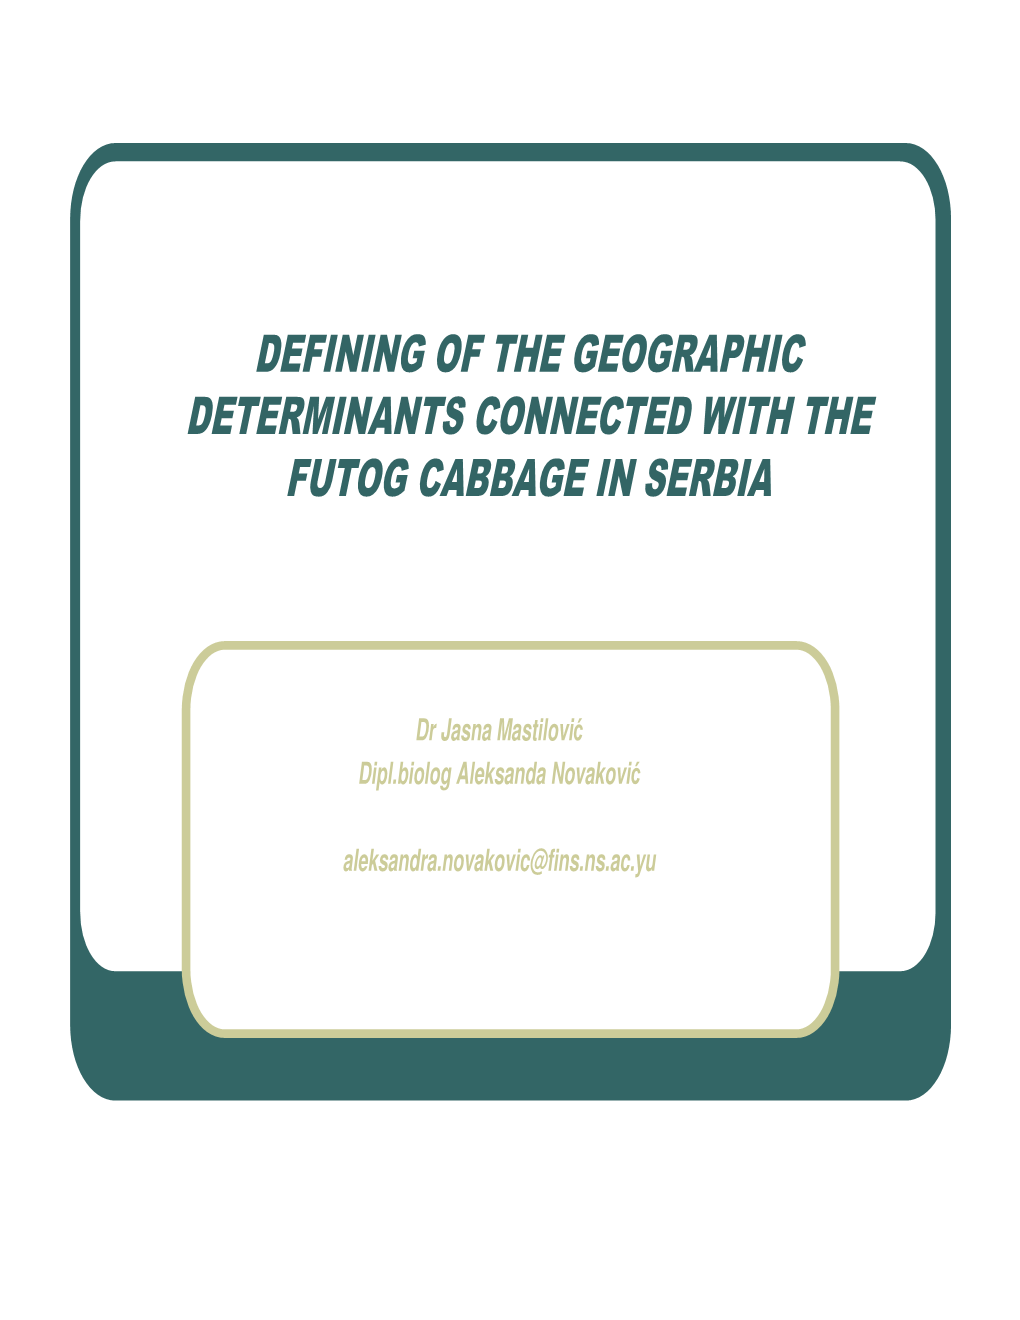 Defining of the Geographic Determinants Connected with the Futog Cabbage in Serbia